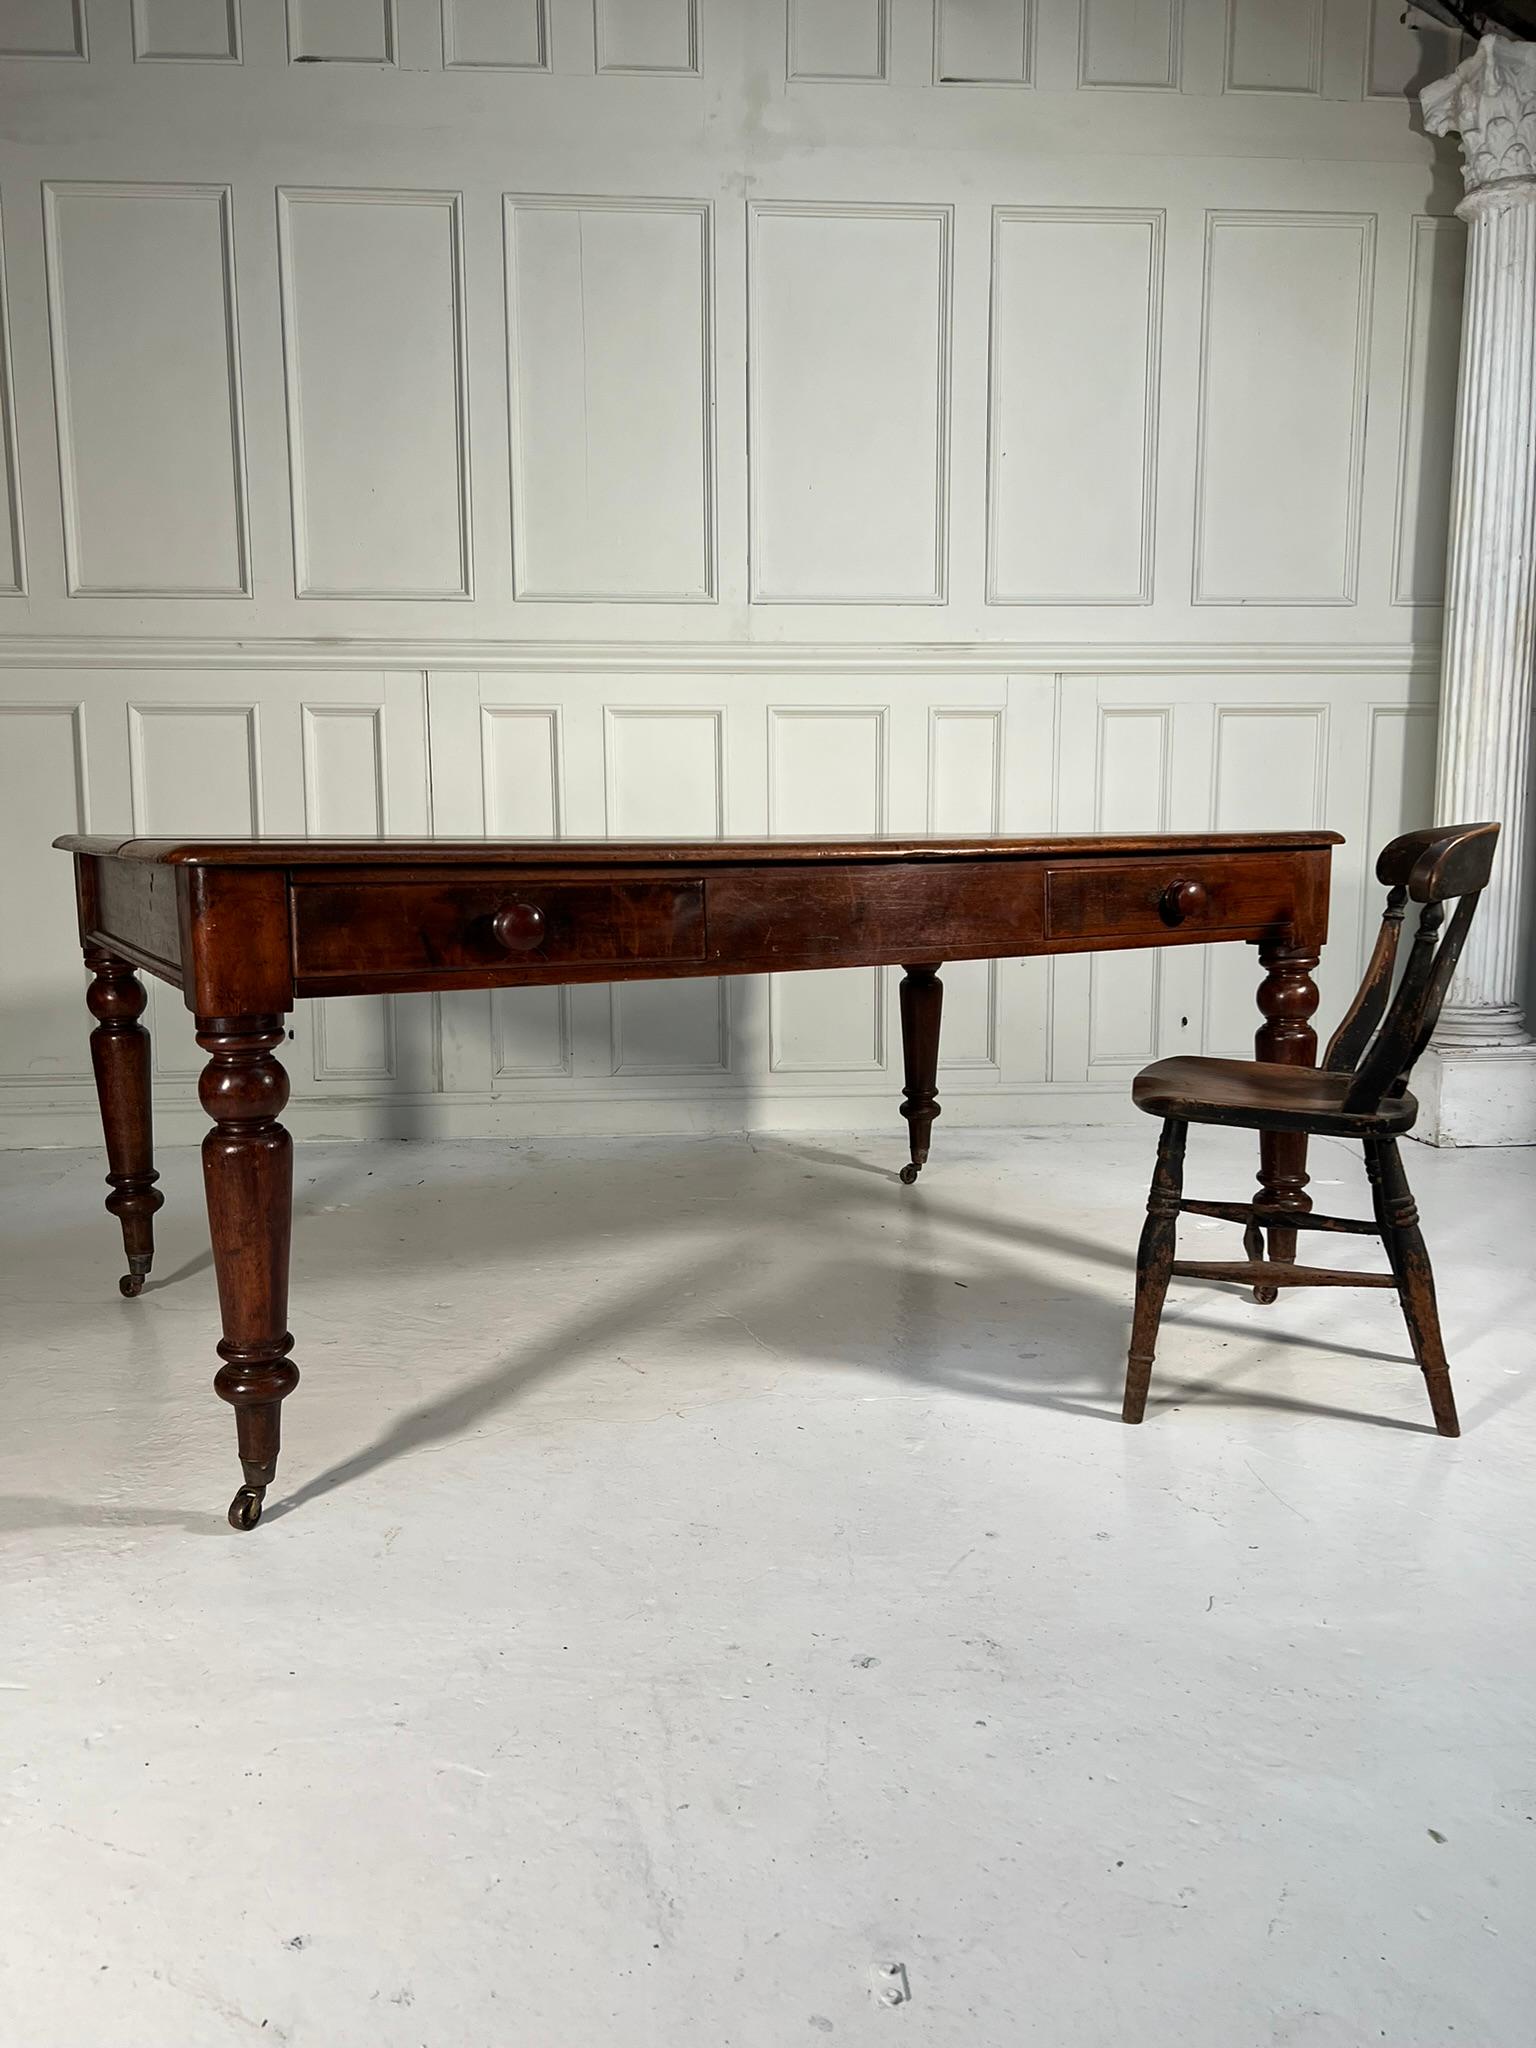 Large country house prep table.

This would have originally been used as a prep table in a large country house kitchen but will work equally as well as a dining table.

Will seat 8 comfortably.

Raised on brass castors with turned legs.

The top